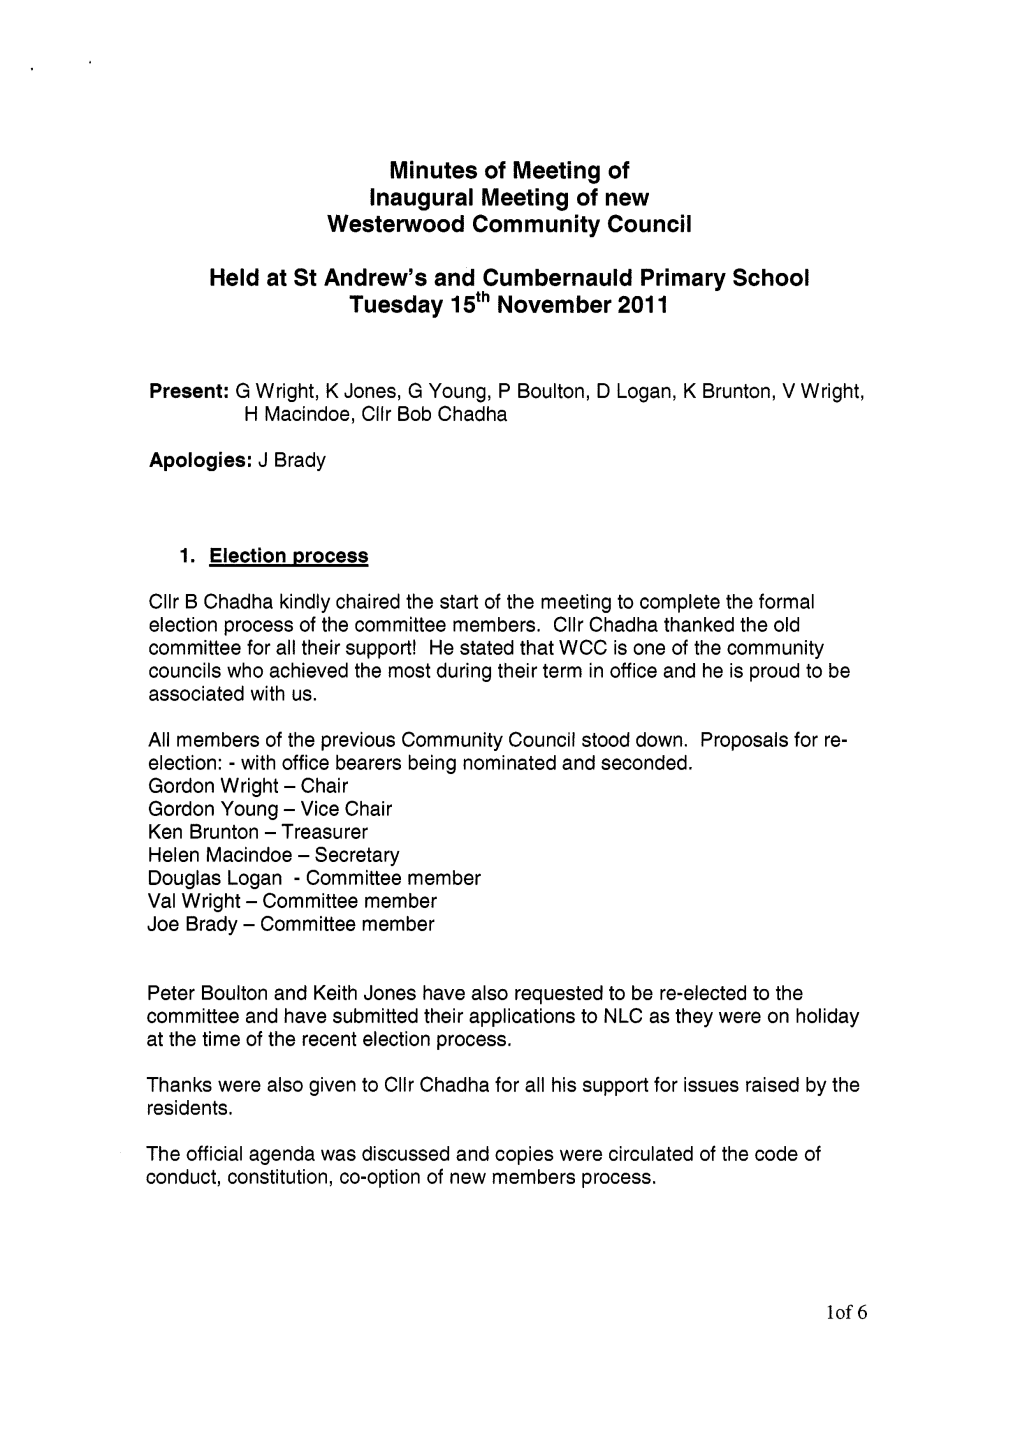 Minutes of Meeting of Inaugural Meeting of New Westerwood Community Council Held at St Andrew's and Cumbernauld Primary School T